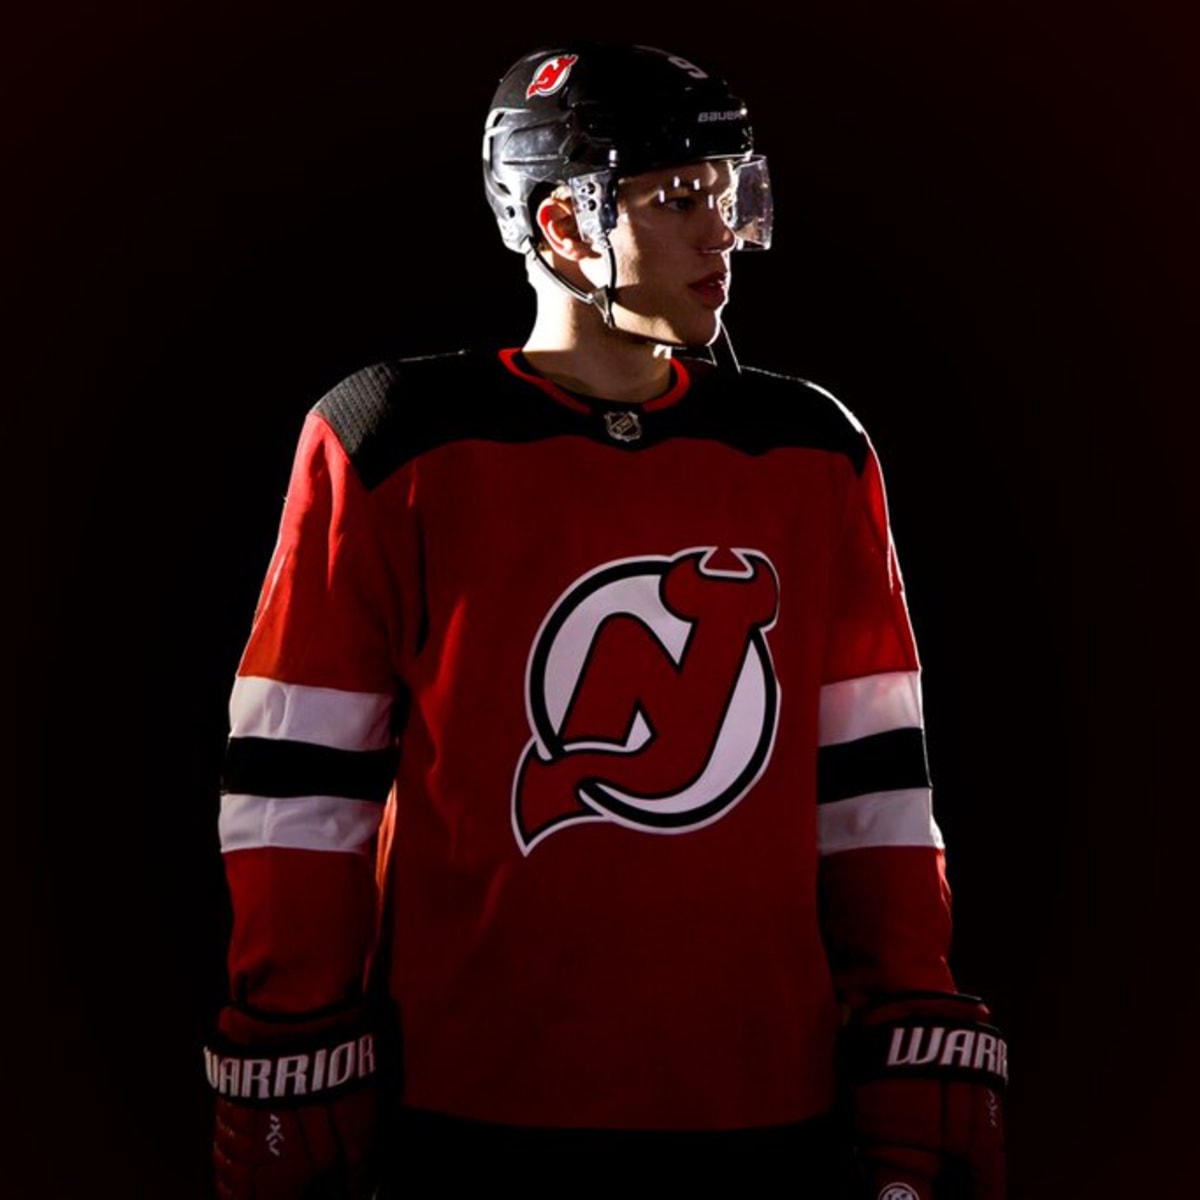 New Jersey Devils' new black sweater has Jersey on front - ESPN